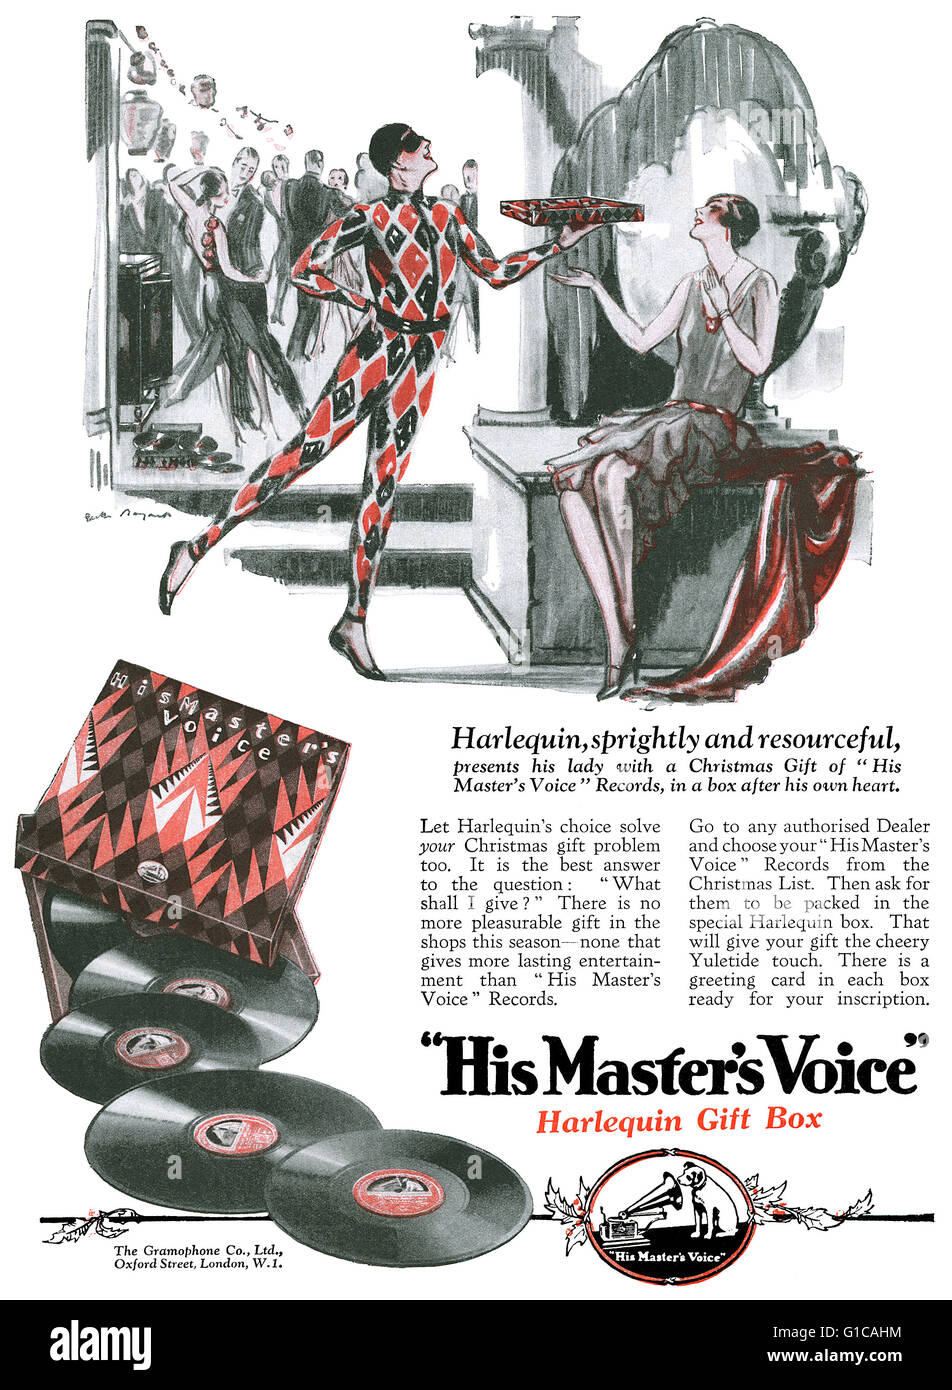 1928 UK advert for His Master's Voice Christmas Harlequin gift box. Stock Photo